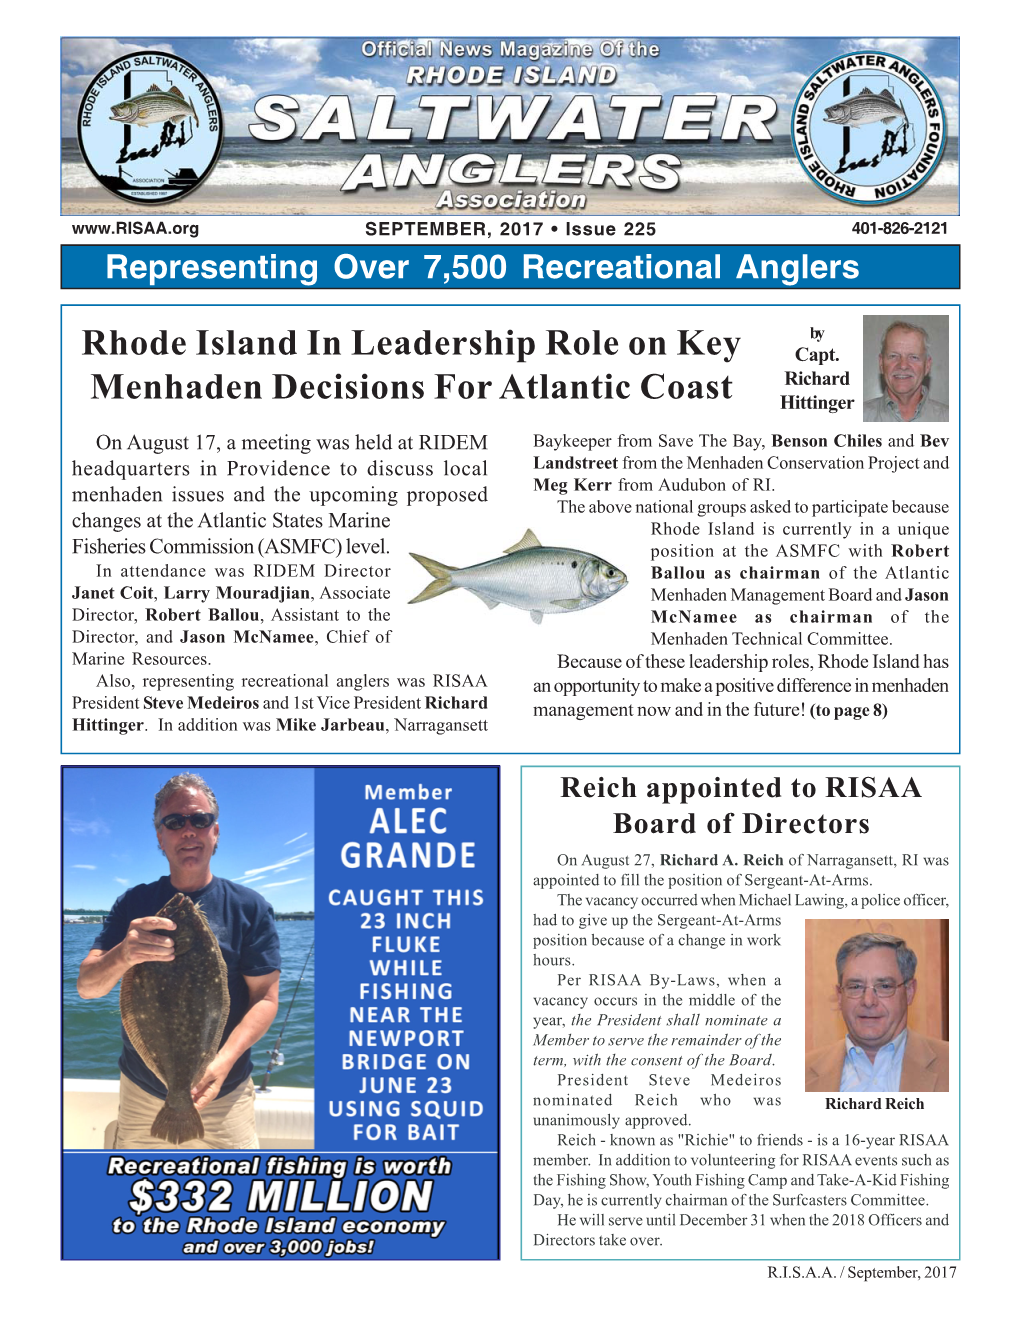 Rhode Island in Leadership Role on Key Menhaden Decisions For